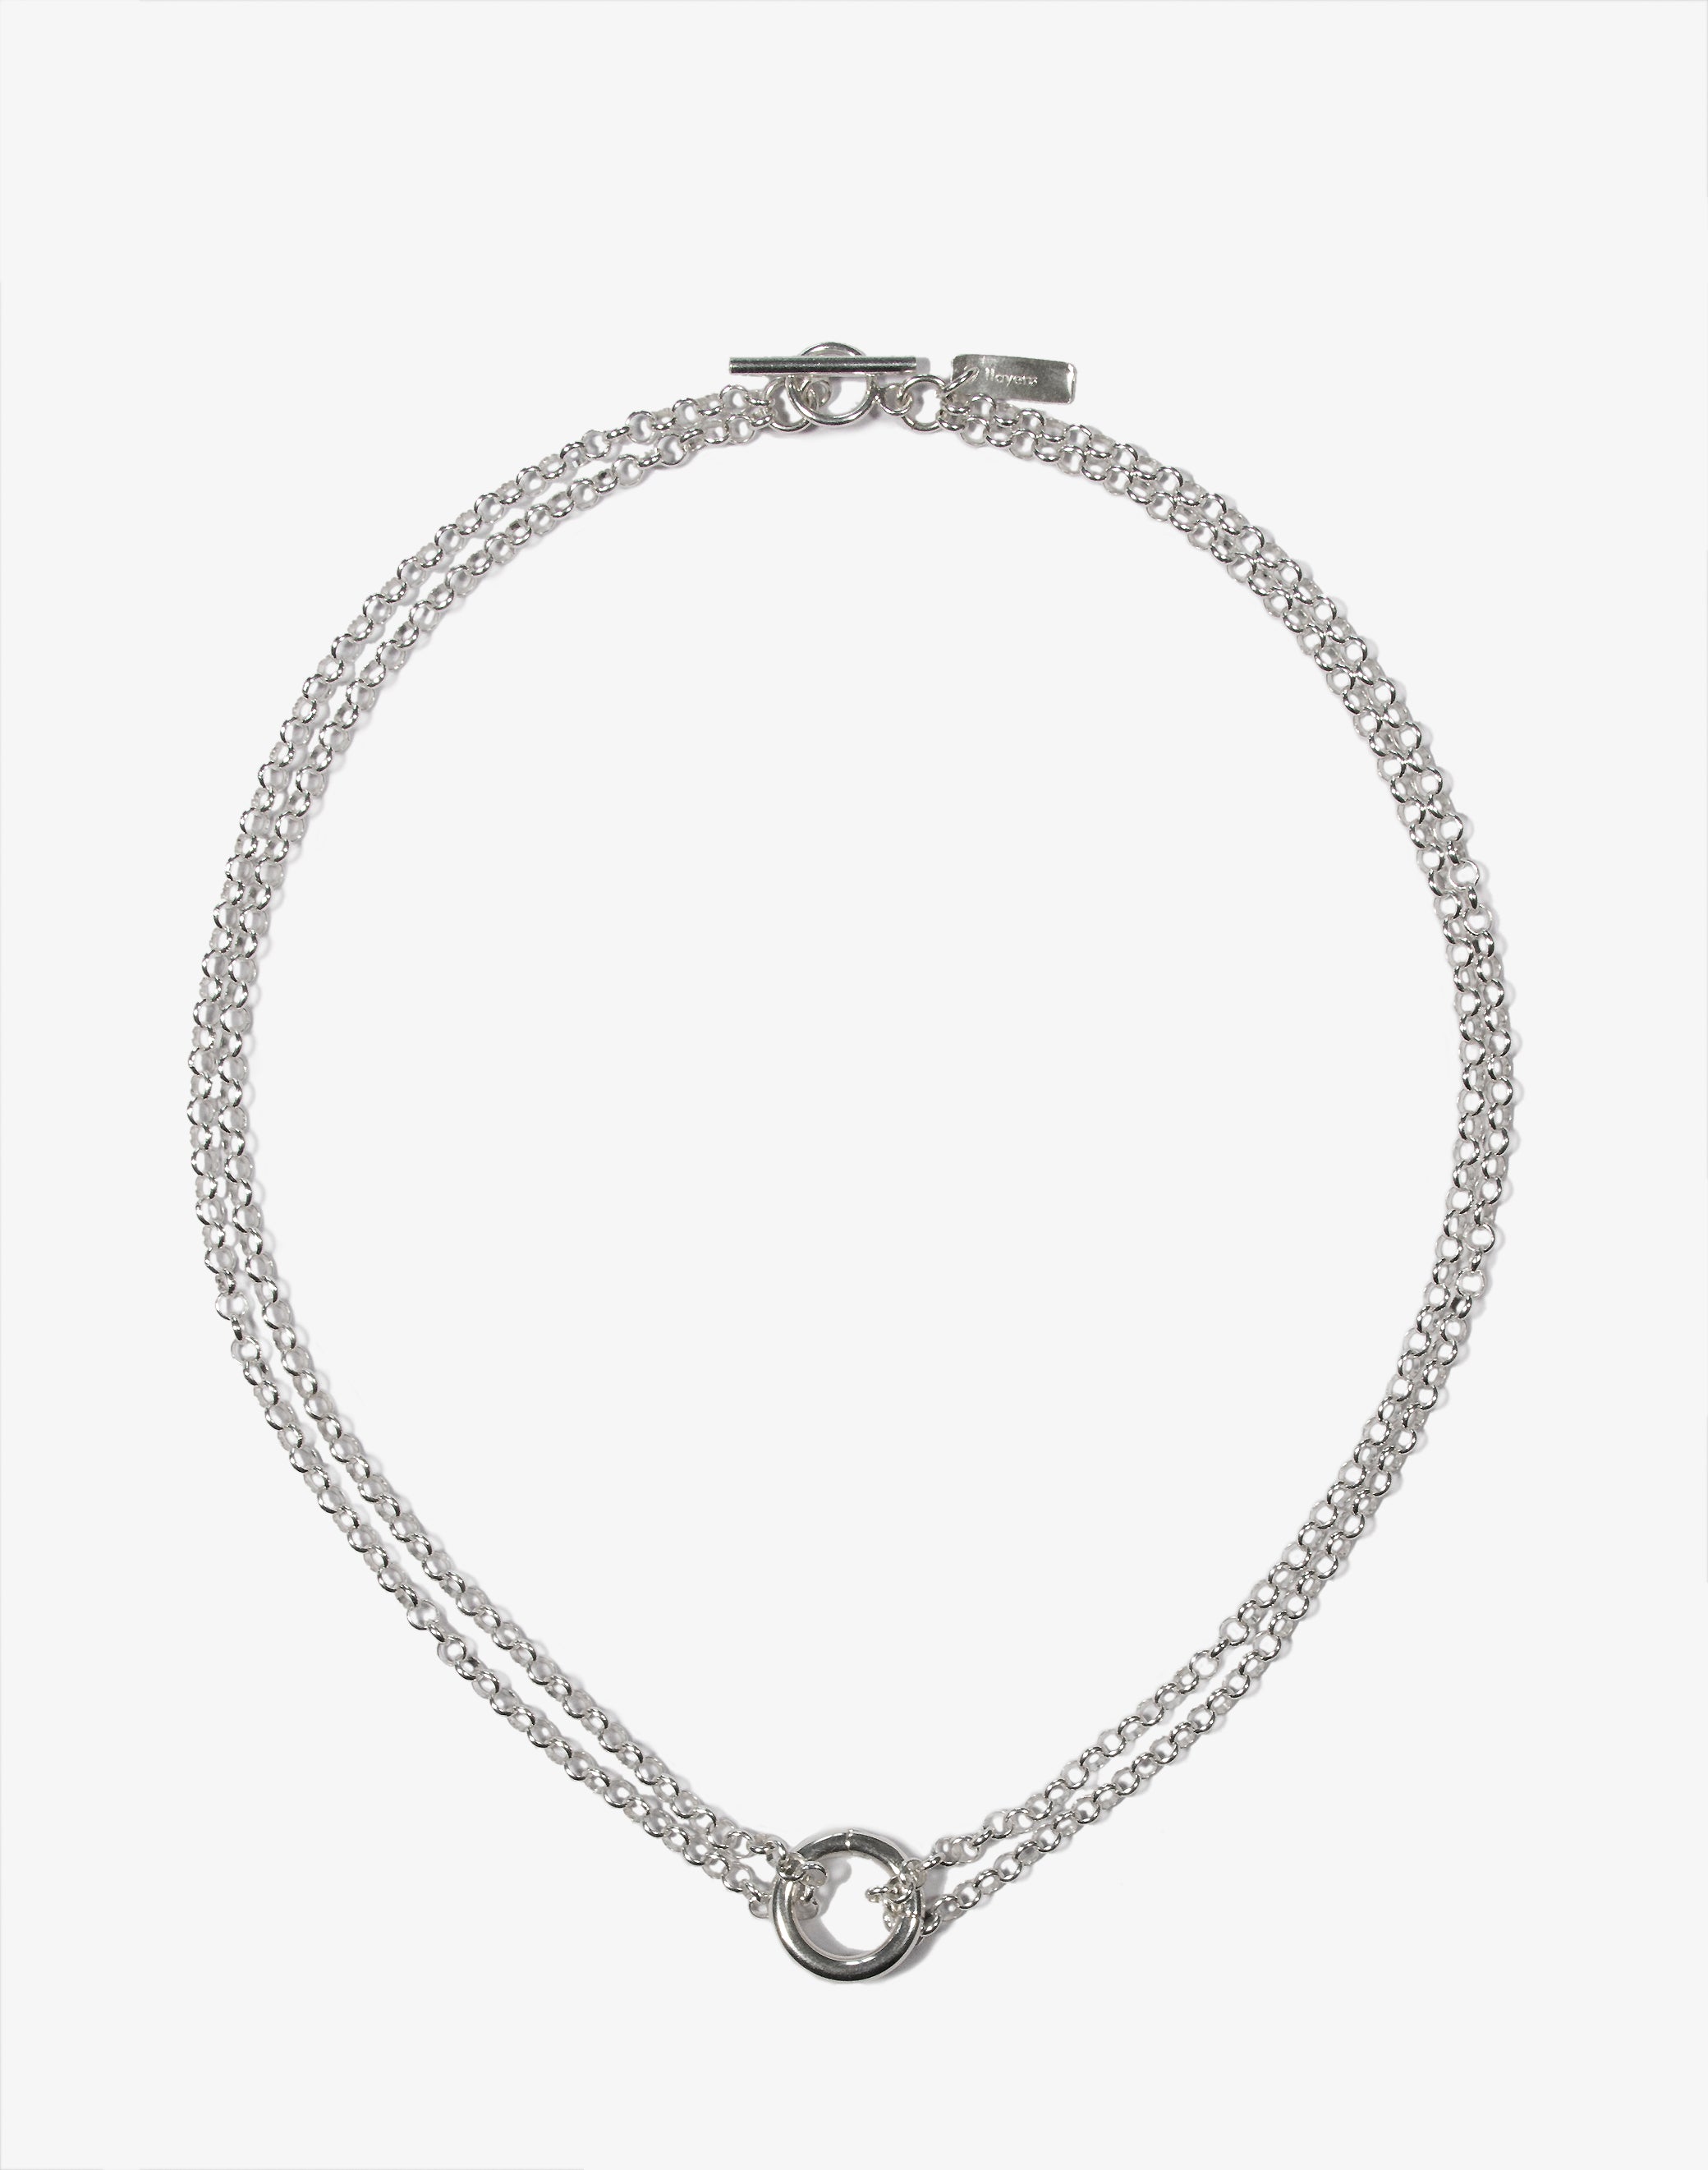 llayers jewelry unite men silver chain rings choker necklace - Made In Brookyn New York 2